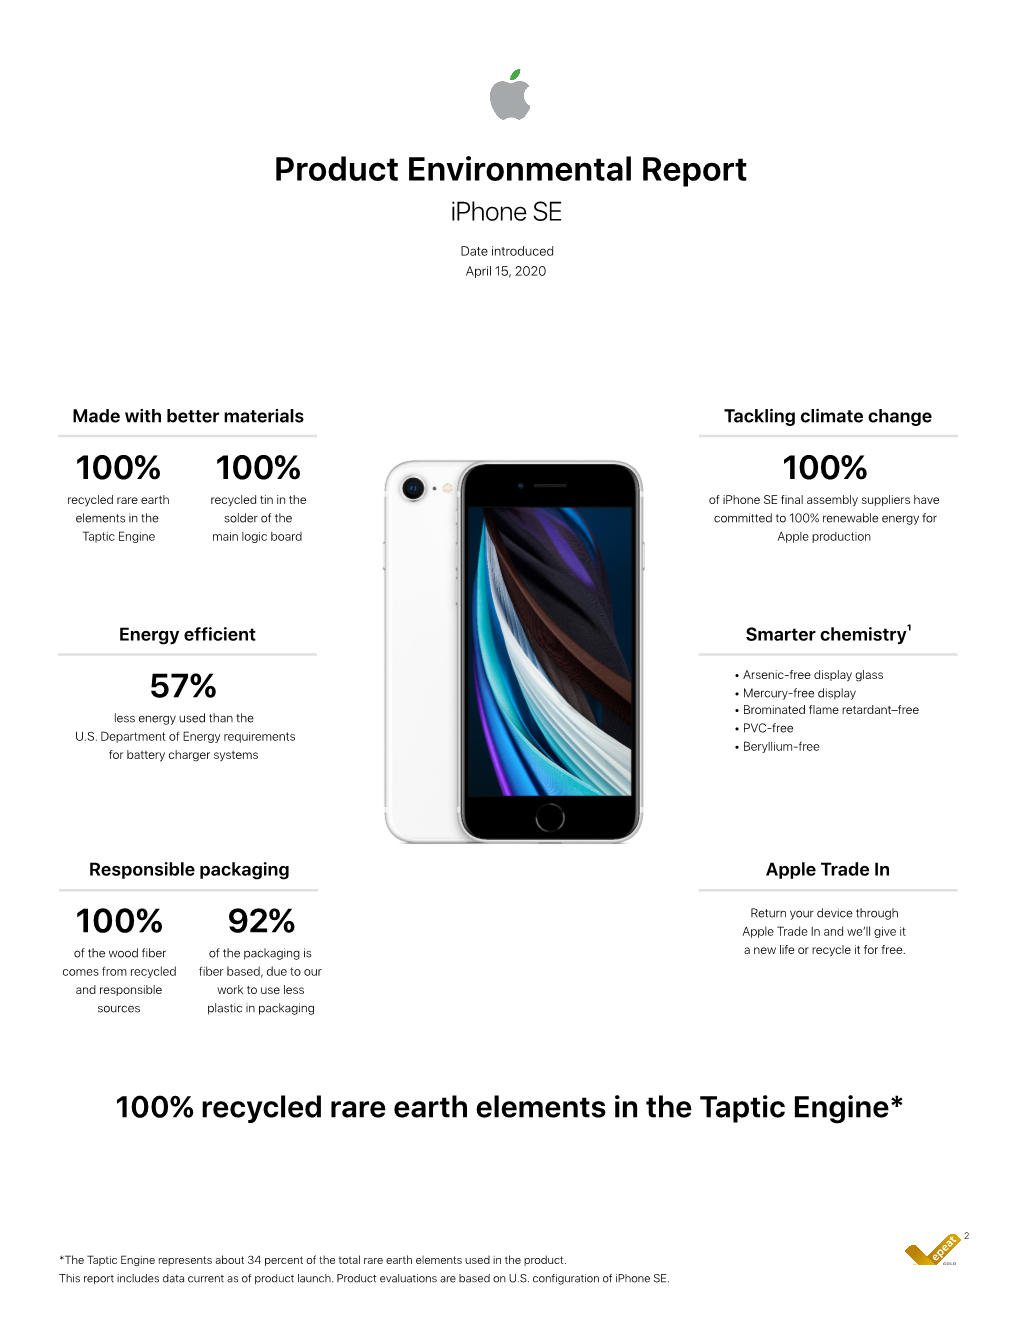 Iphone SE Product Environmental Report